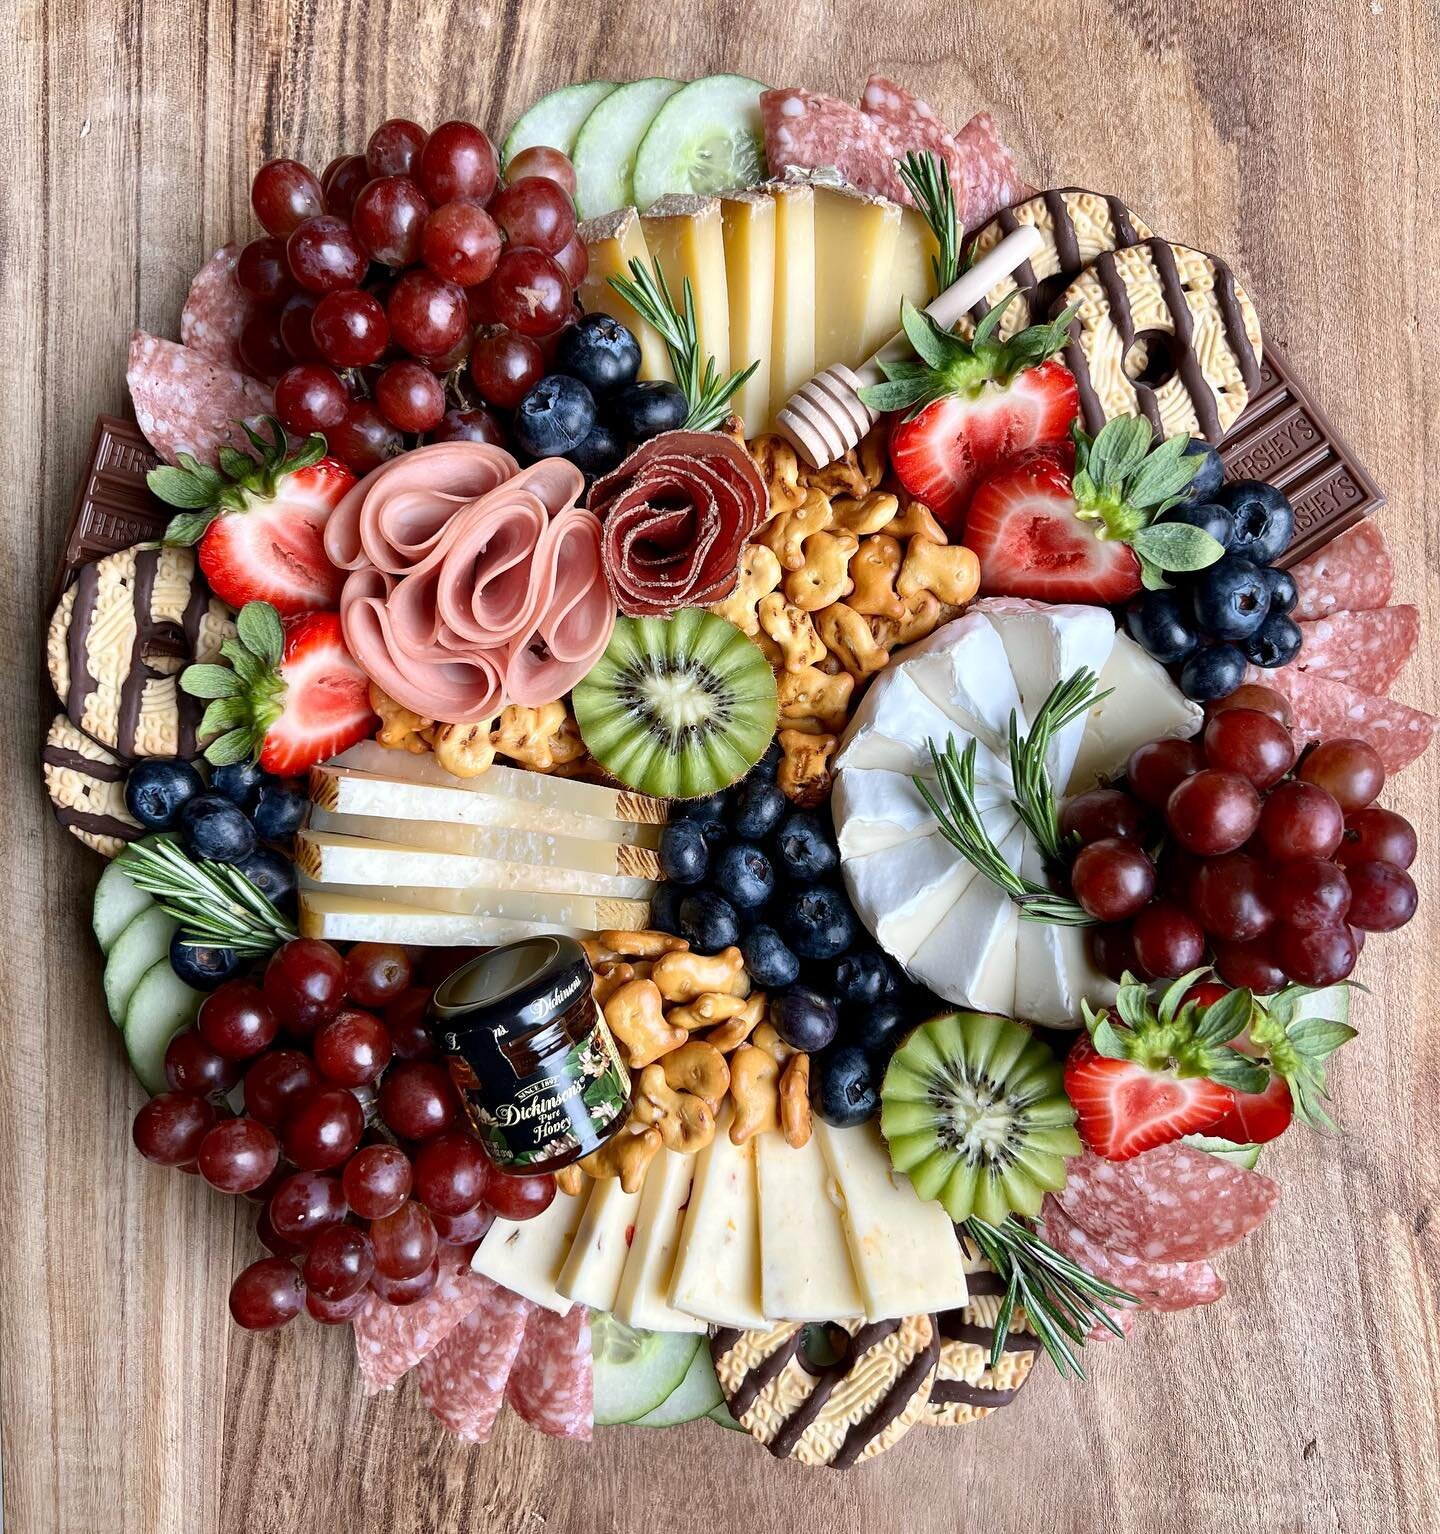 Nothing says &ldquo;I Love You, Baby&rdquo; like Cheese &amp; Charcuterie ❤️❤️❤️ 

Give him what he wants this Father&rsquo;s Day, a MadeByMerryNY Custom Curated Luxury Charcuterie Board Fit for a King 🎁👨🏻😘👑

From Brie to Manchego to Comte to Pe